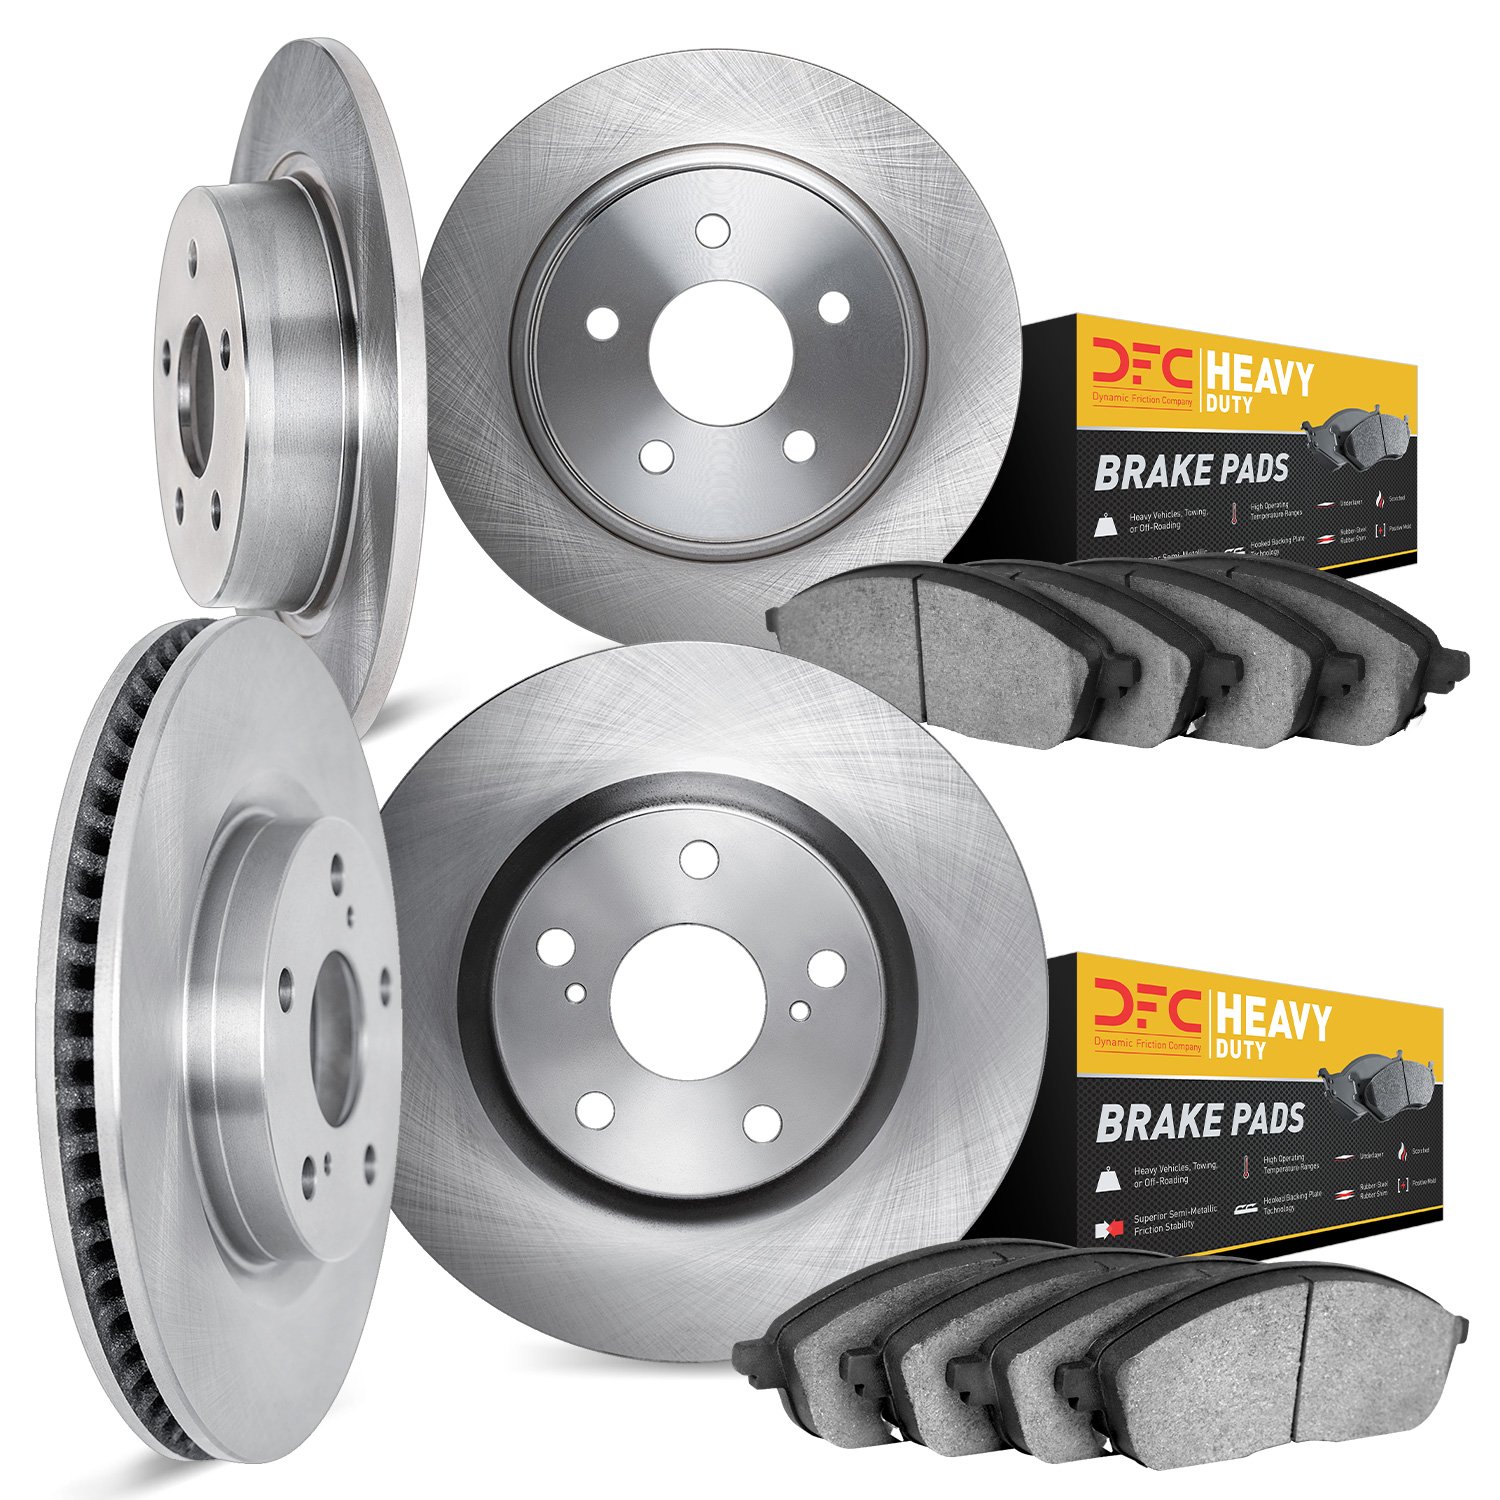 6204-99354 Brake Rotors w/Heavy-Duty Brake Pads Kit, Fits Select Ford/Lincoln/Mercury/Mazda, Position: Front and Rear